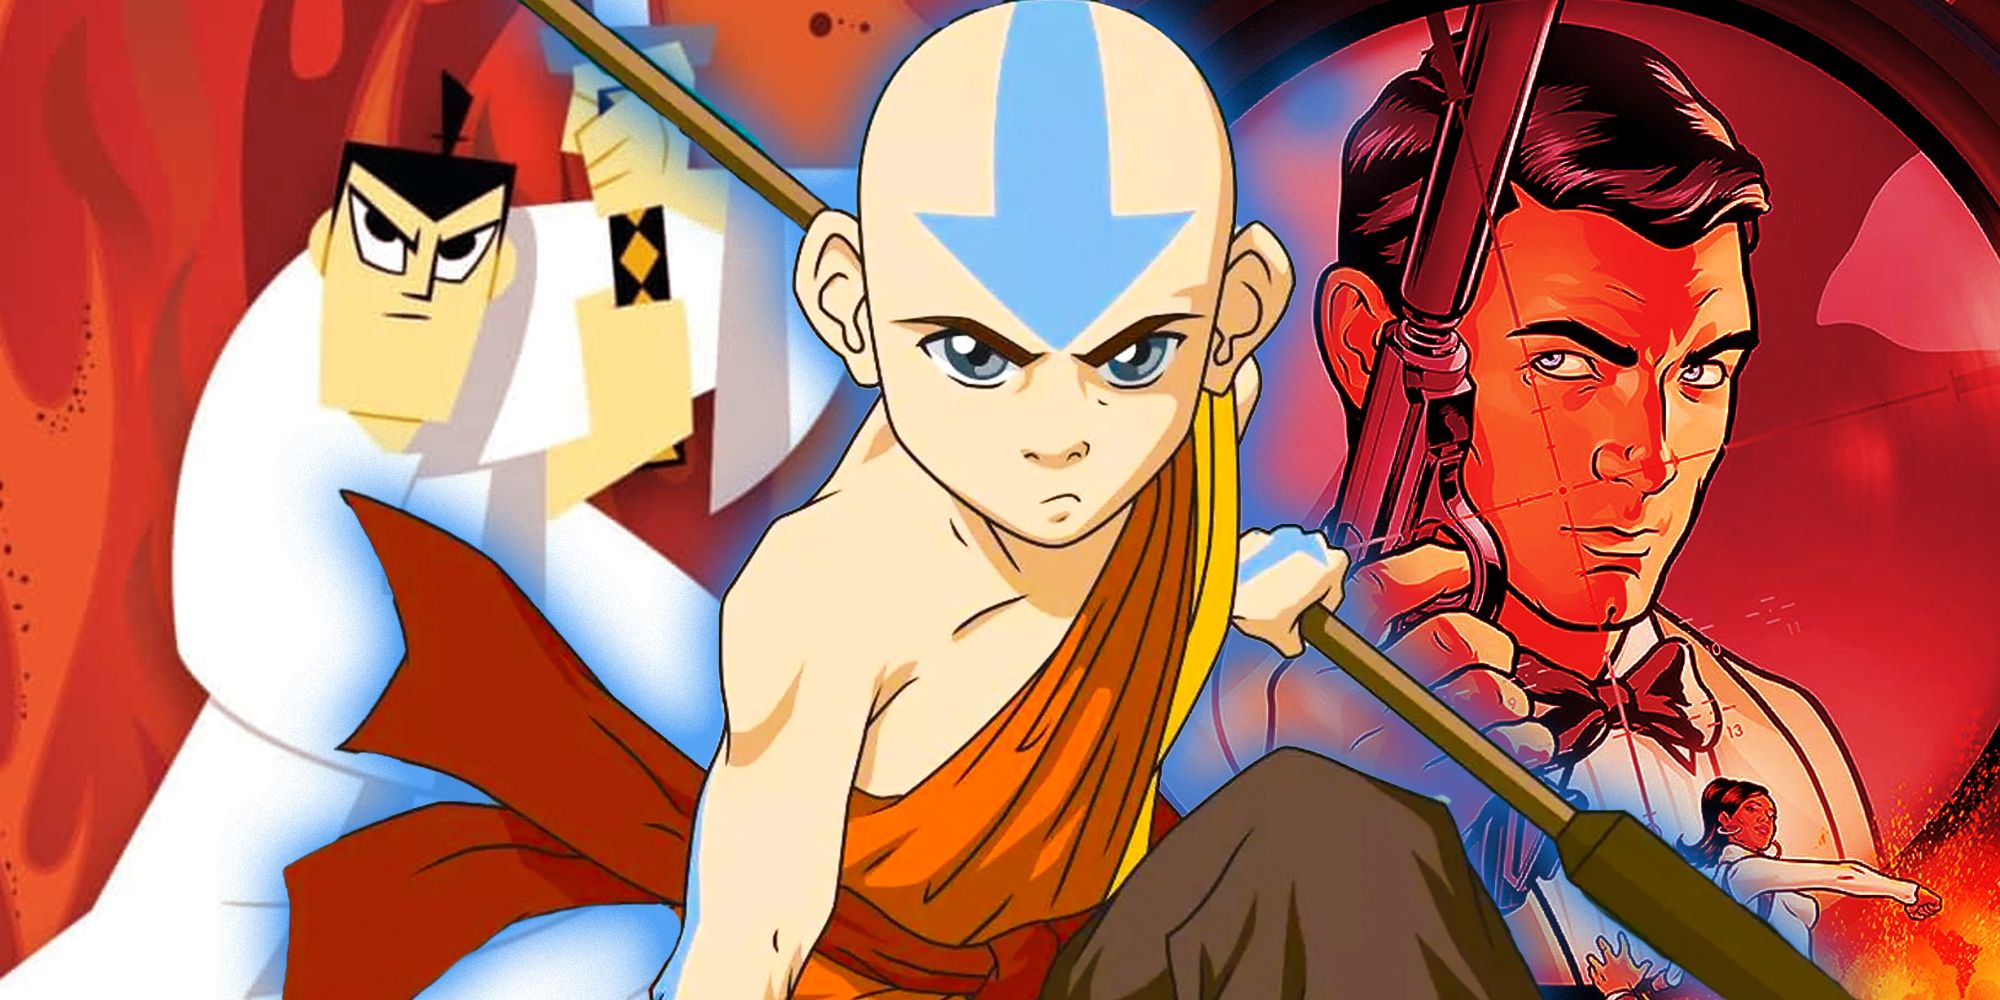 Collage of Samurai Jack, Aang, and Archer